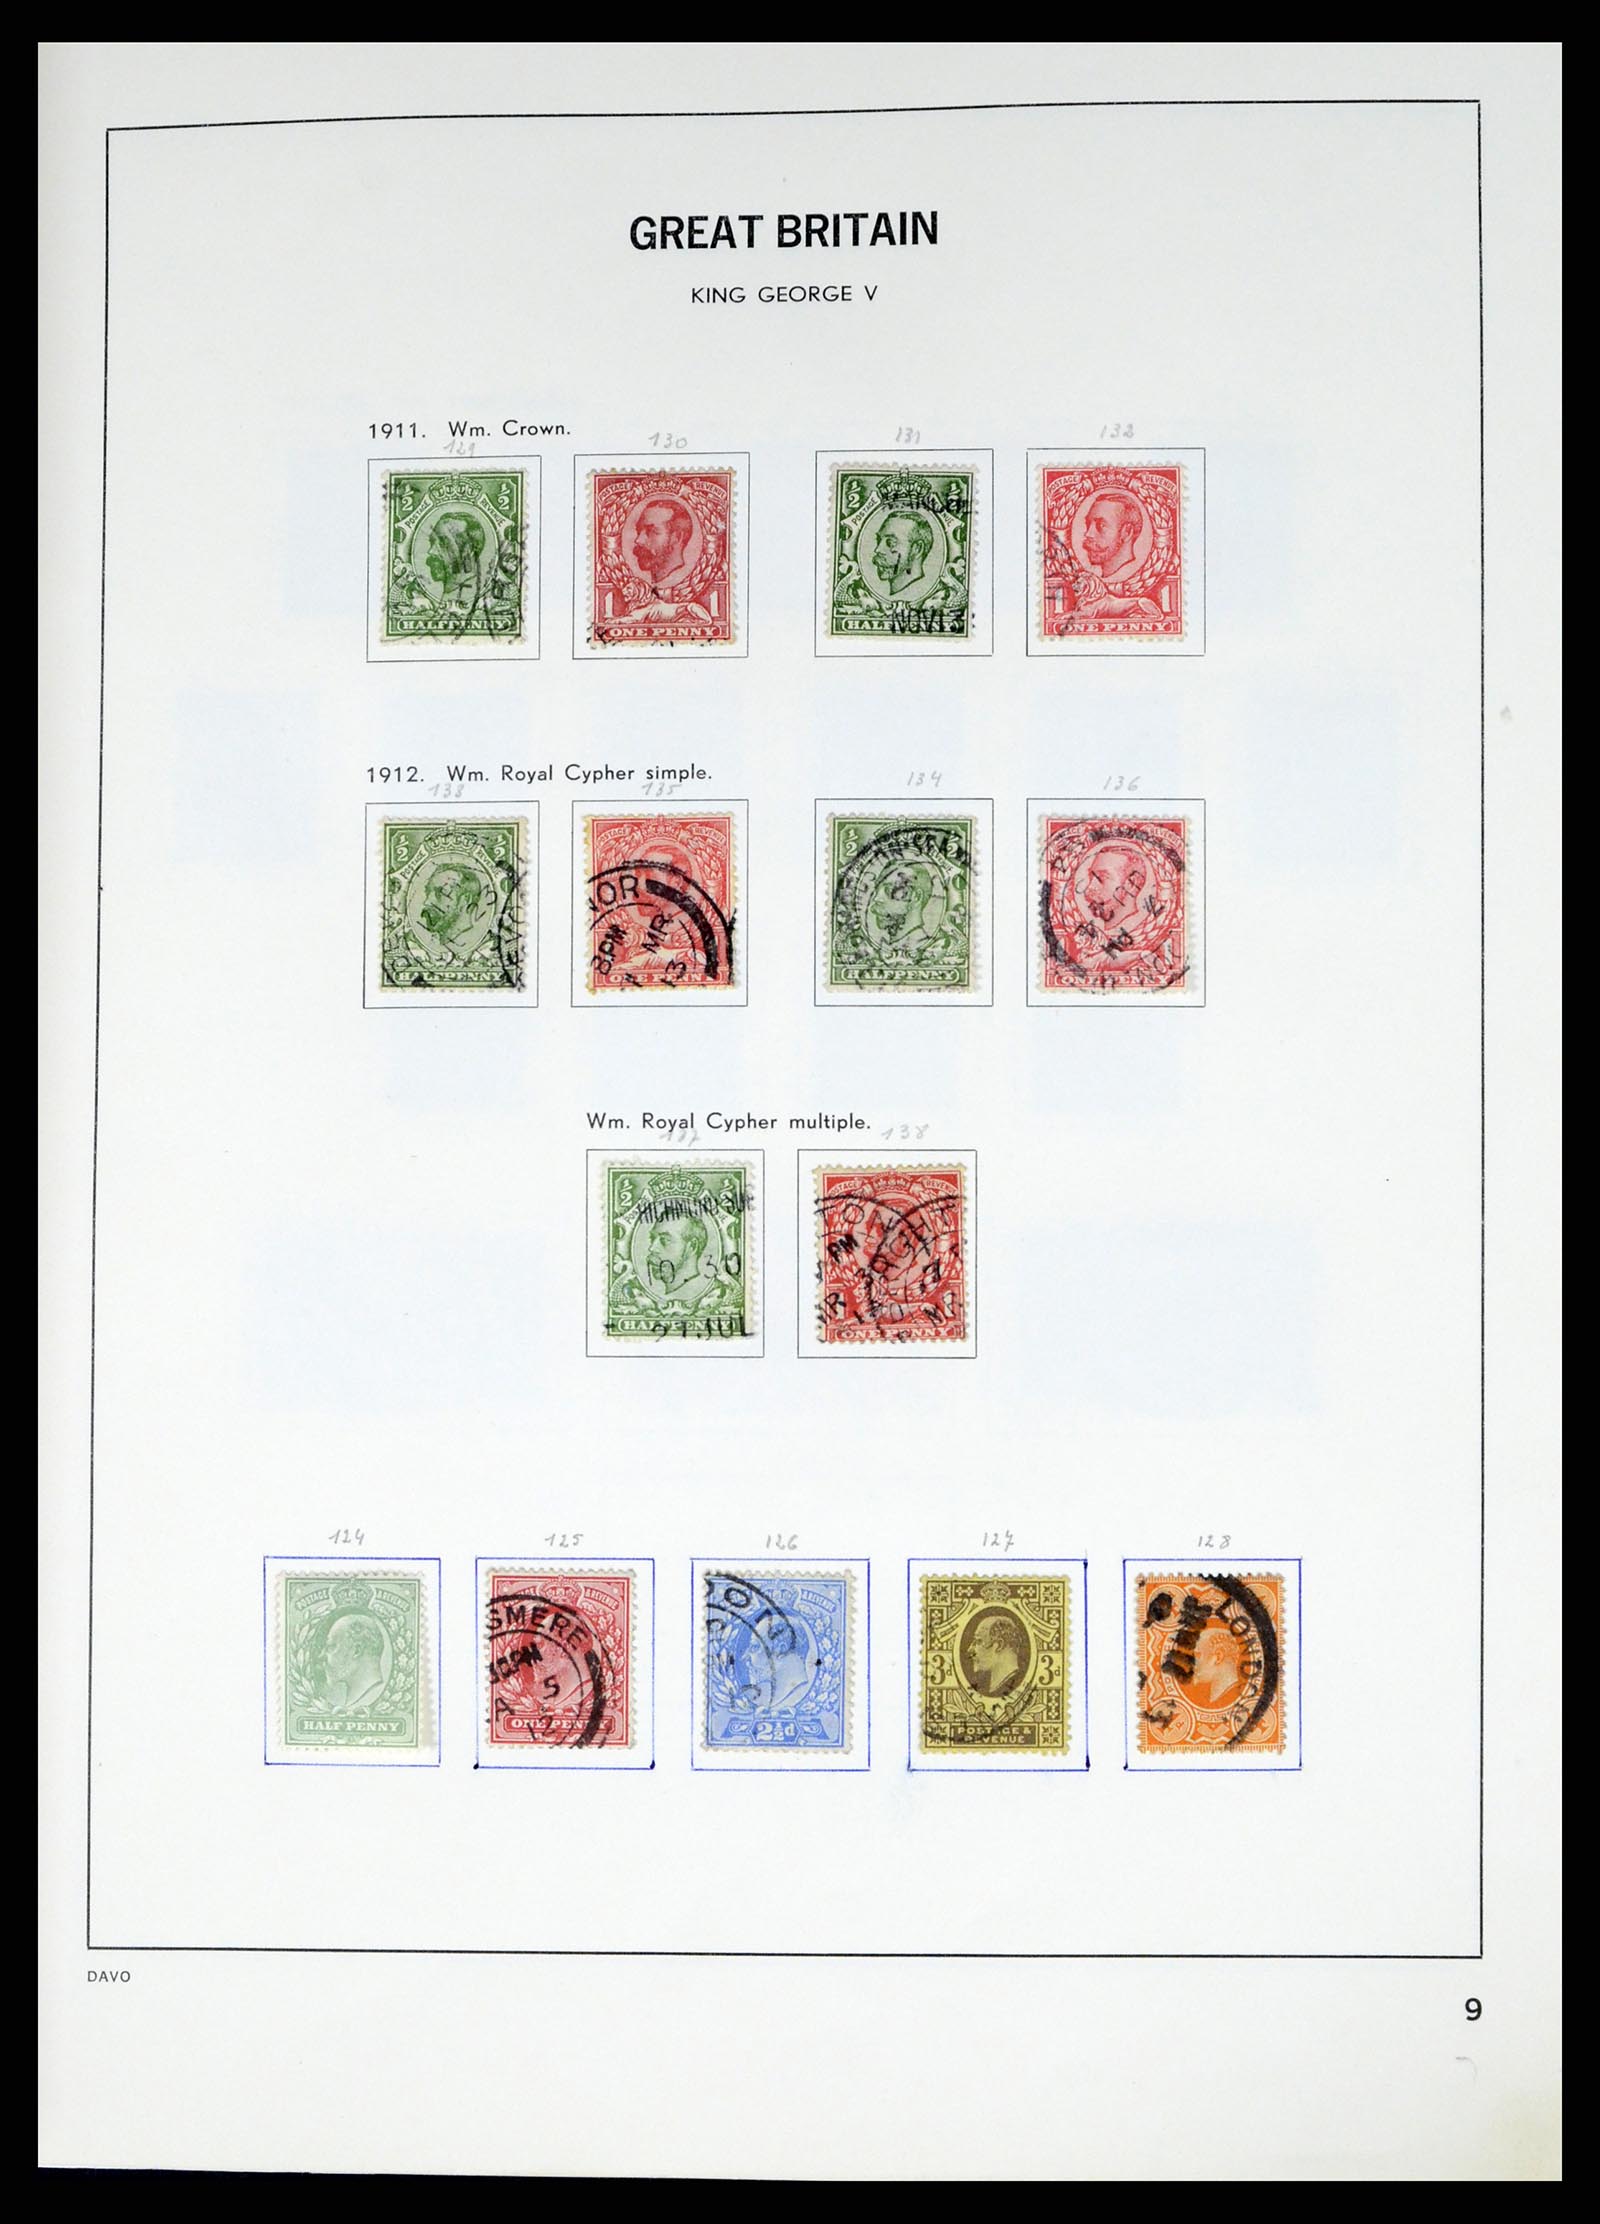 37375 032 - Stamp collection 37375 Great Britain 1840-1982.